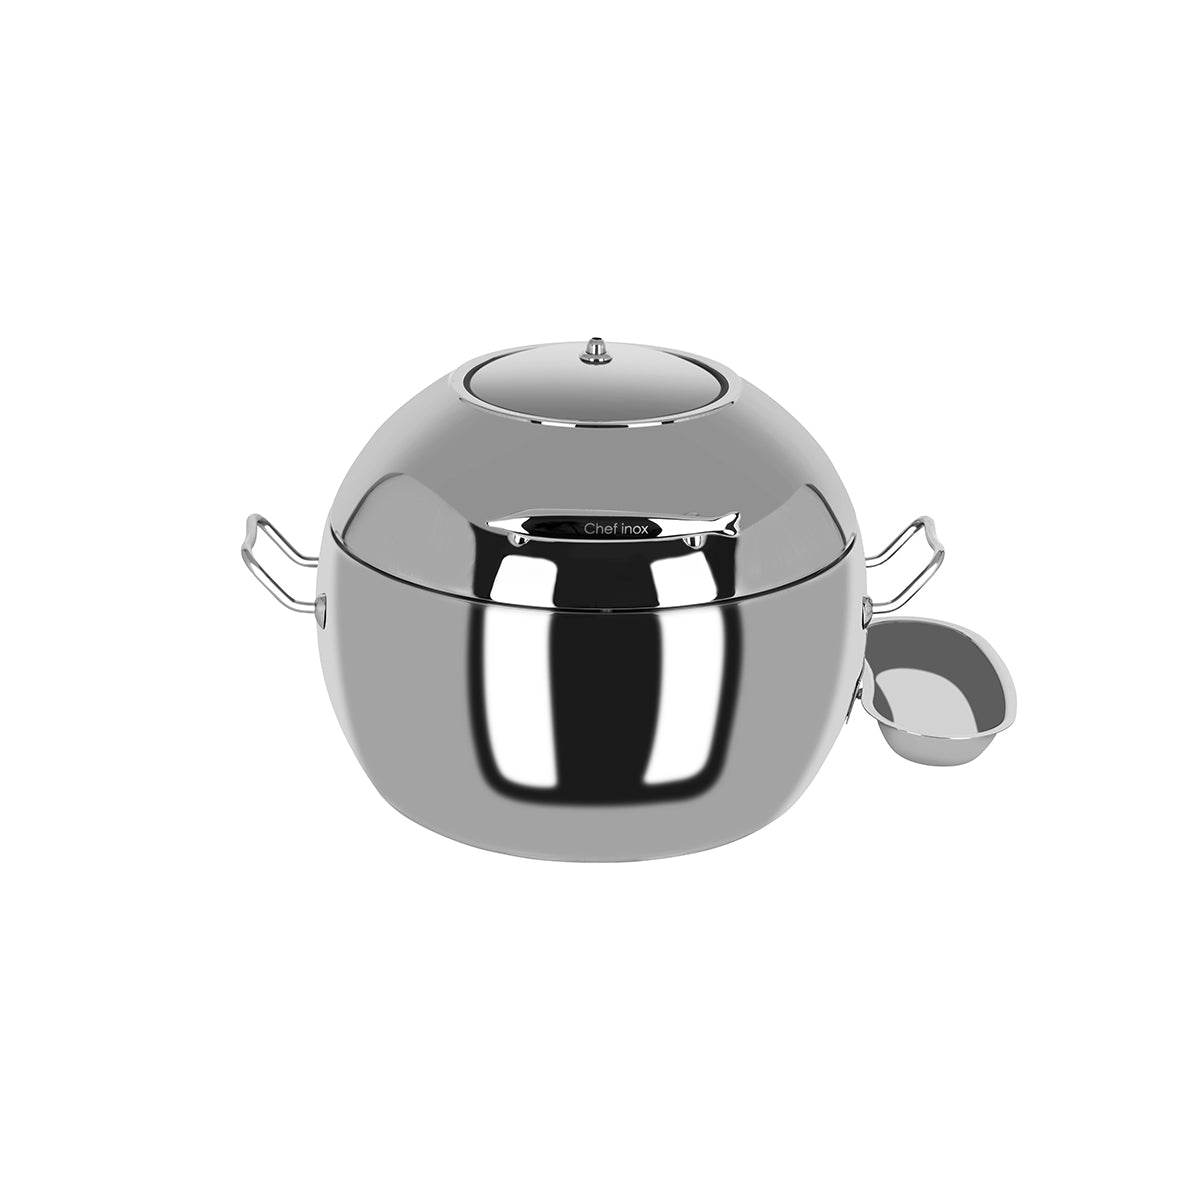 54919 Chef Inox Delux Soup Station 18/8 Stainless Steel 11Lt with Glass Lid Tomkin Australia Hospitality Supplies